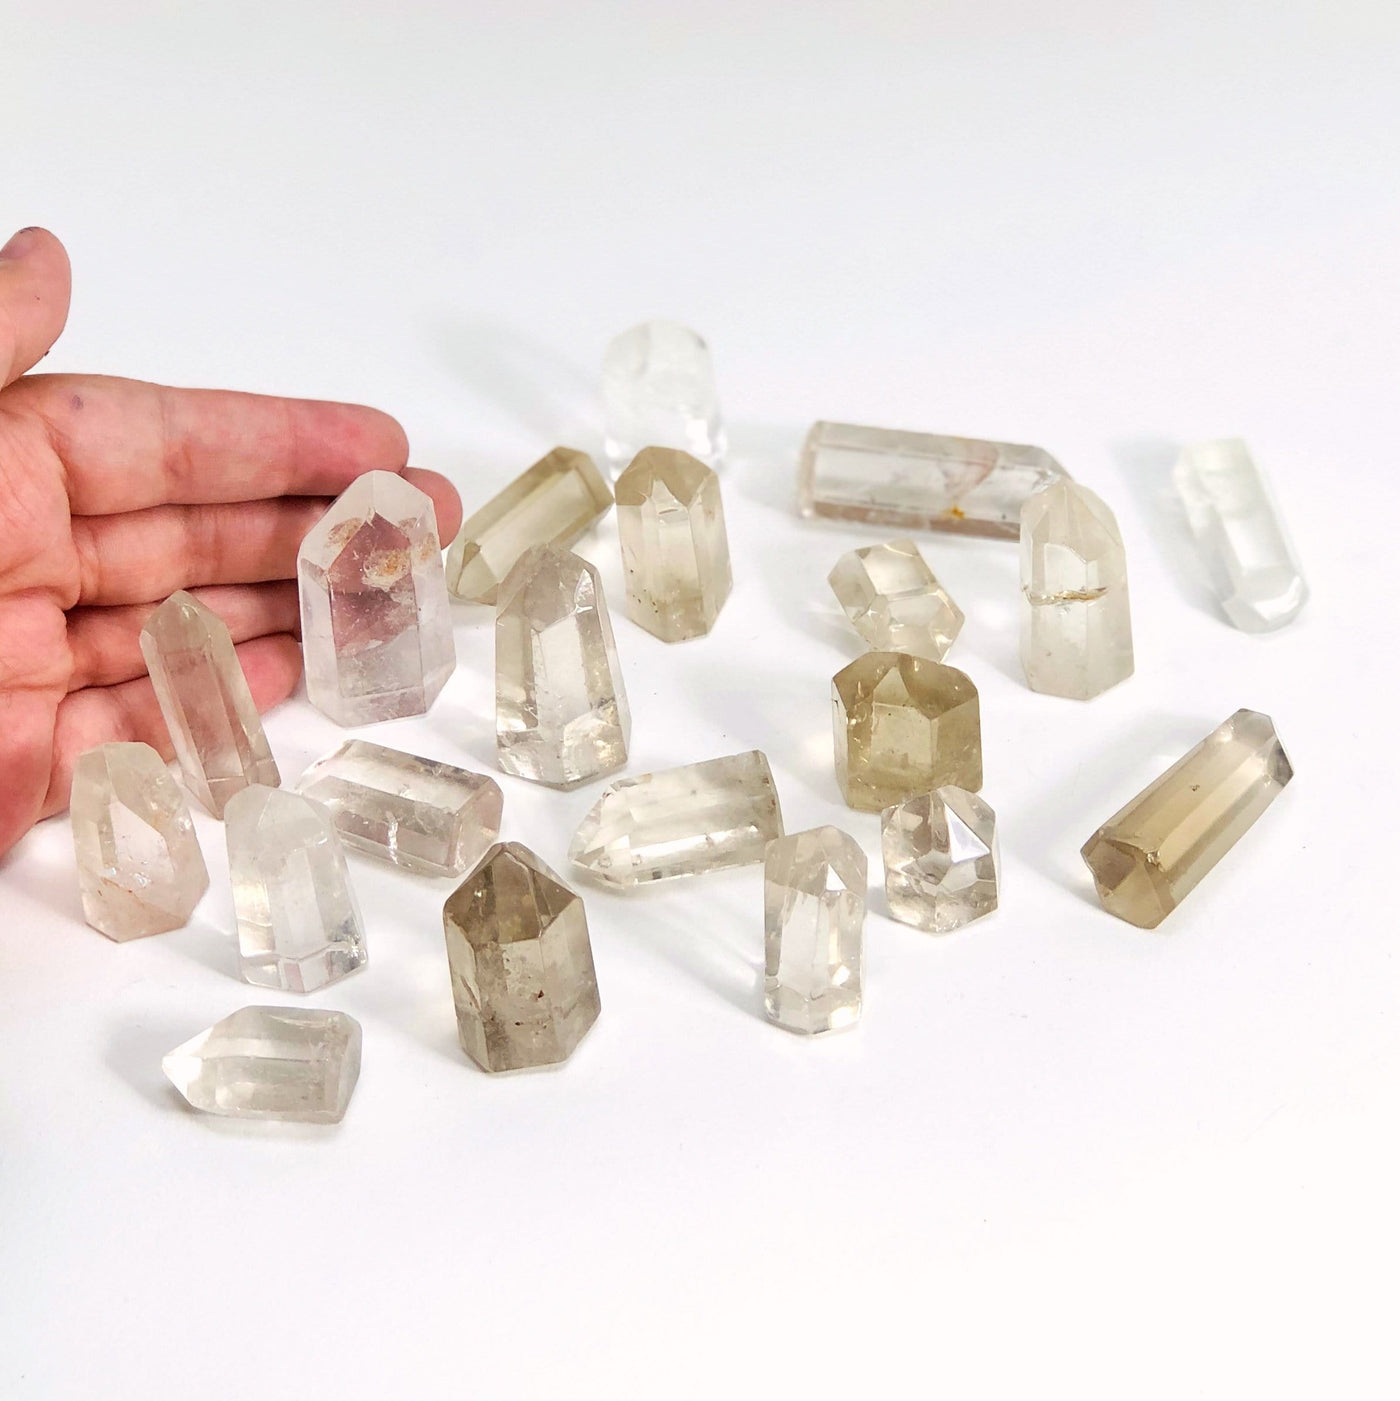 Crystal Quartz Polished Points laid out  with a hand for size reference